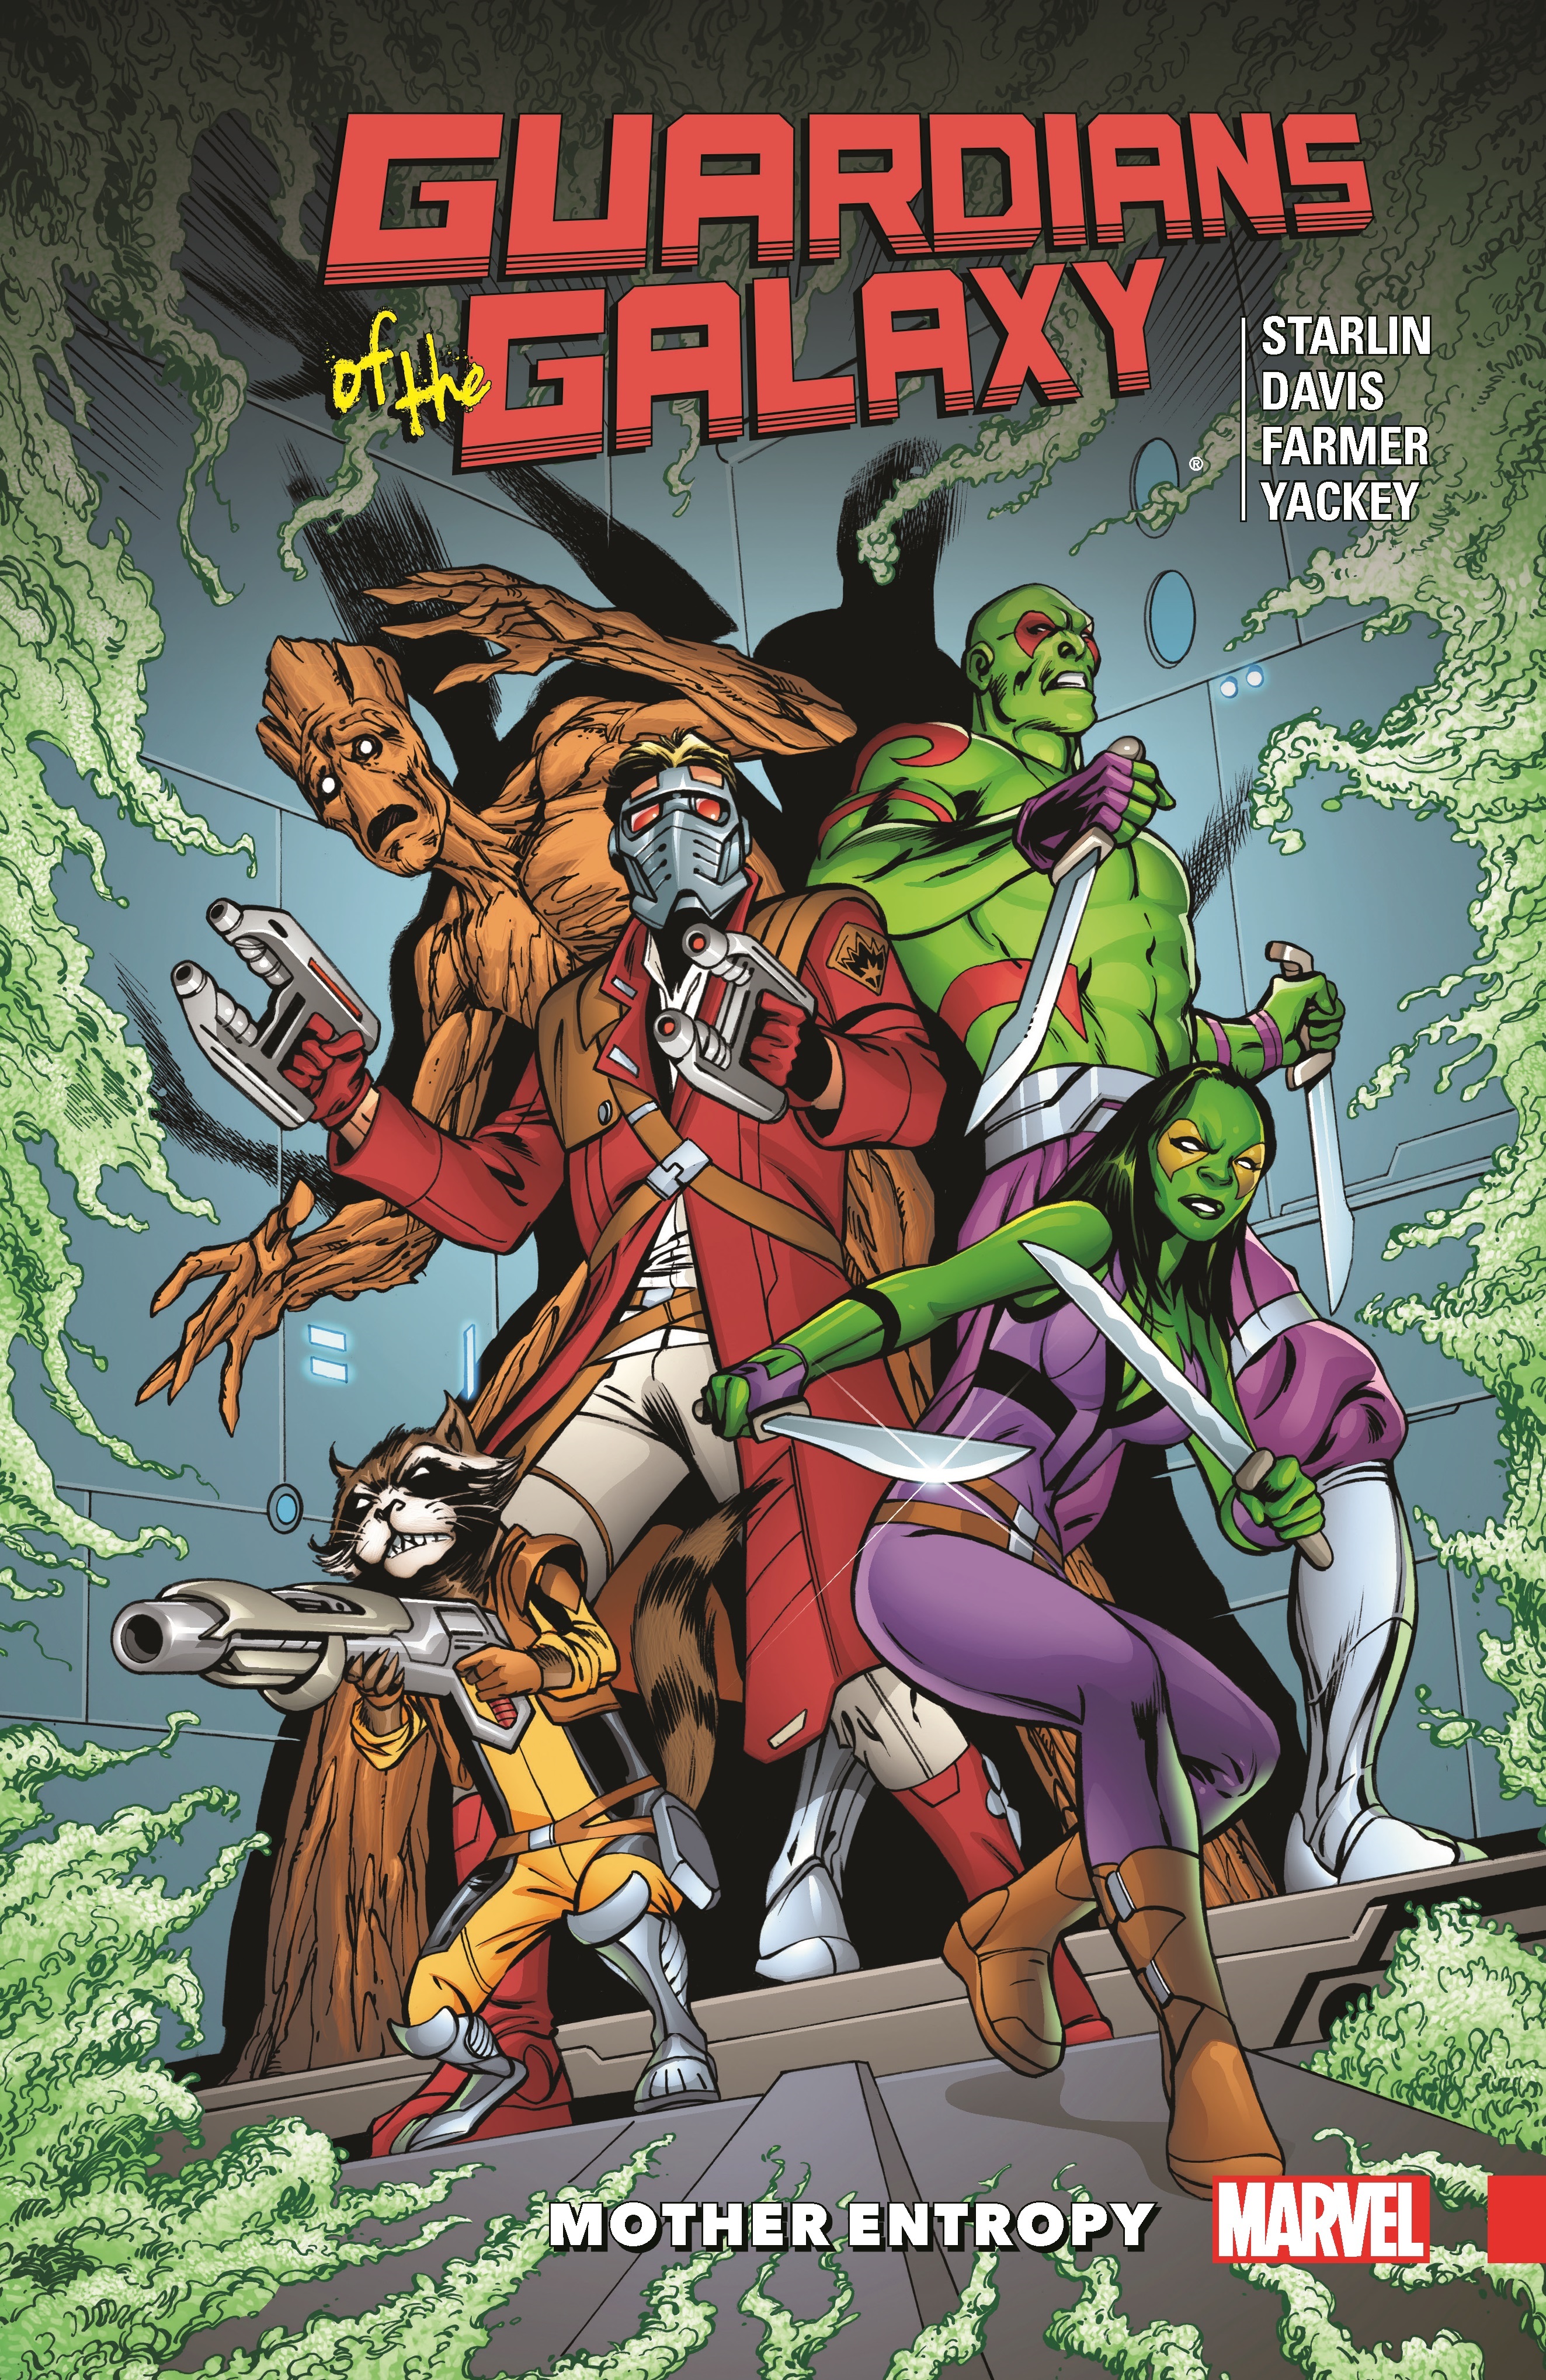 GUARDIANS OF THE GALAXY: MOTHER ENTROPY TPB (Trade Paperback)